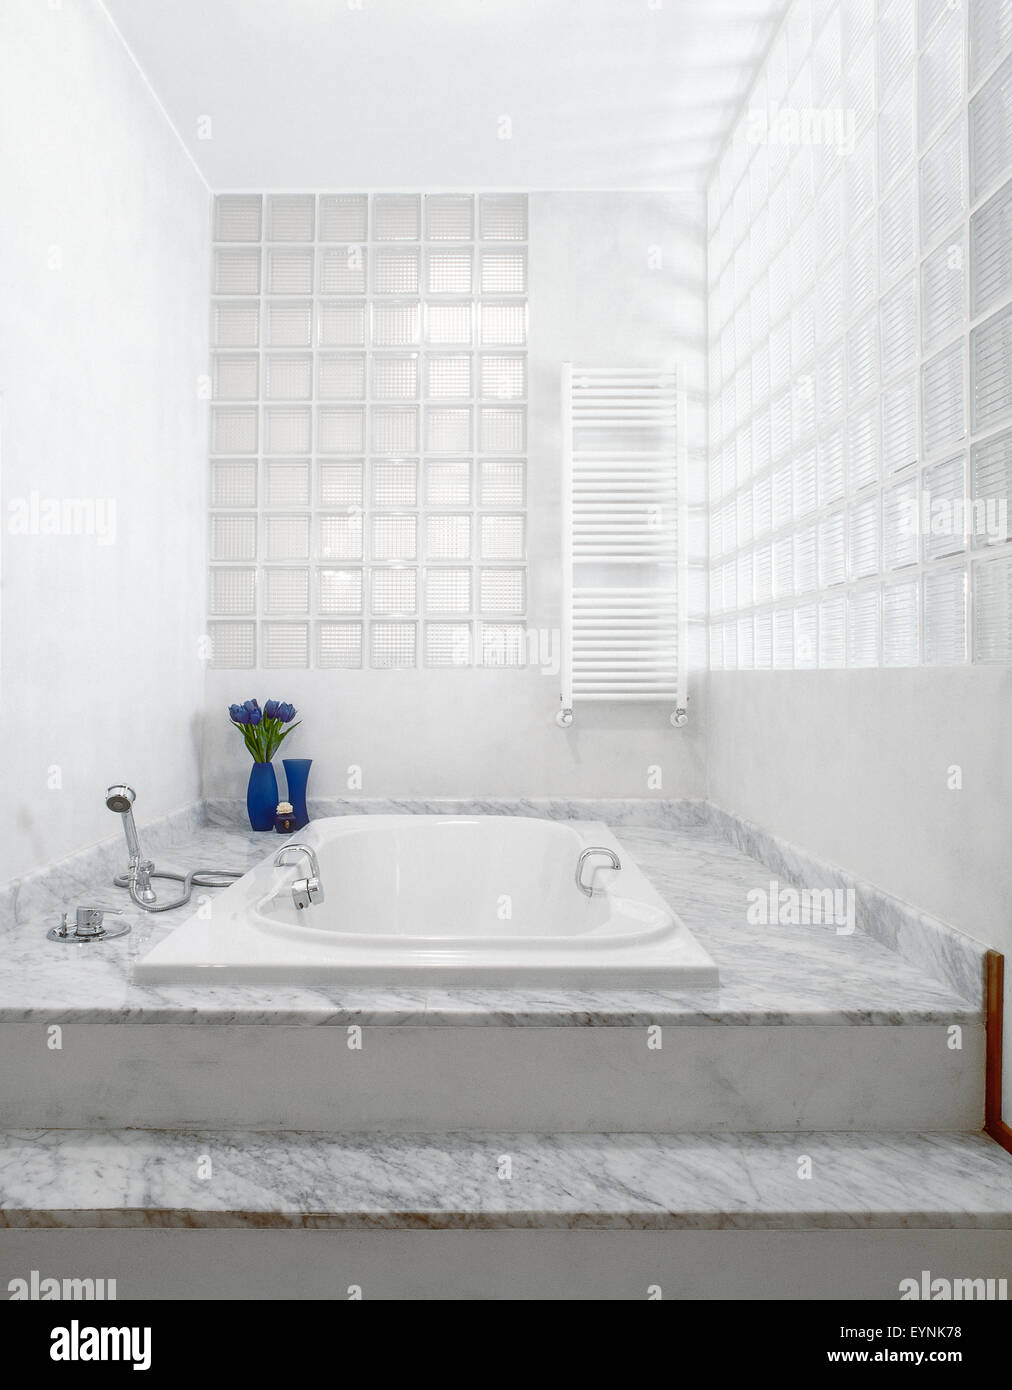 foreground  a sunken tub in the raised access floor of marble in the modern bathroom with a wall made of glass blocks Stock Photo